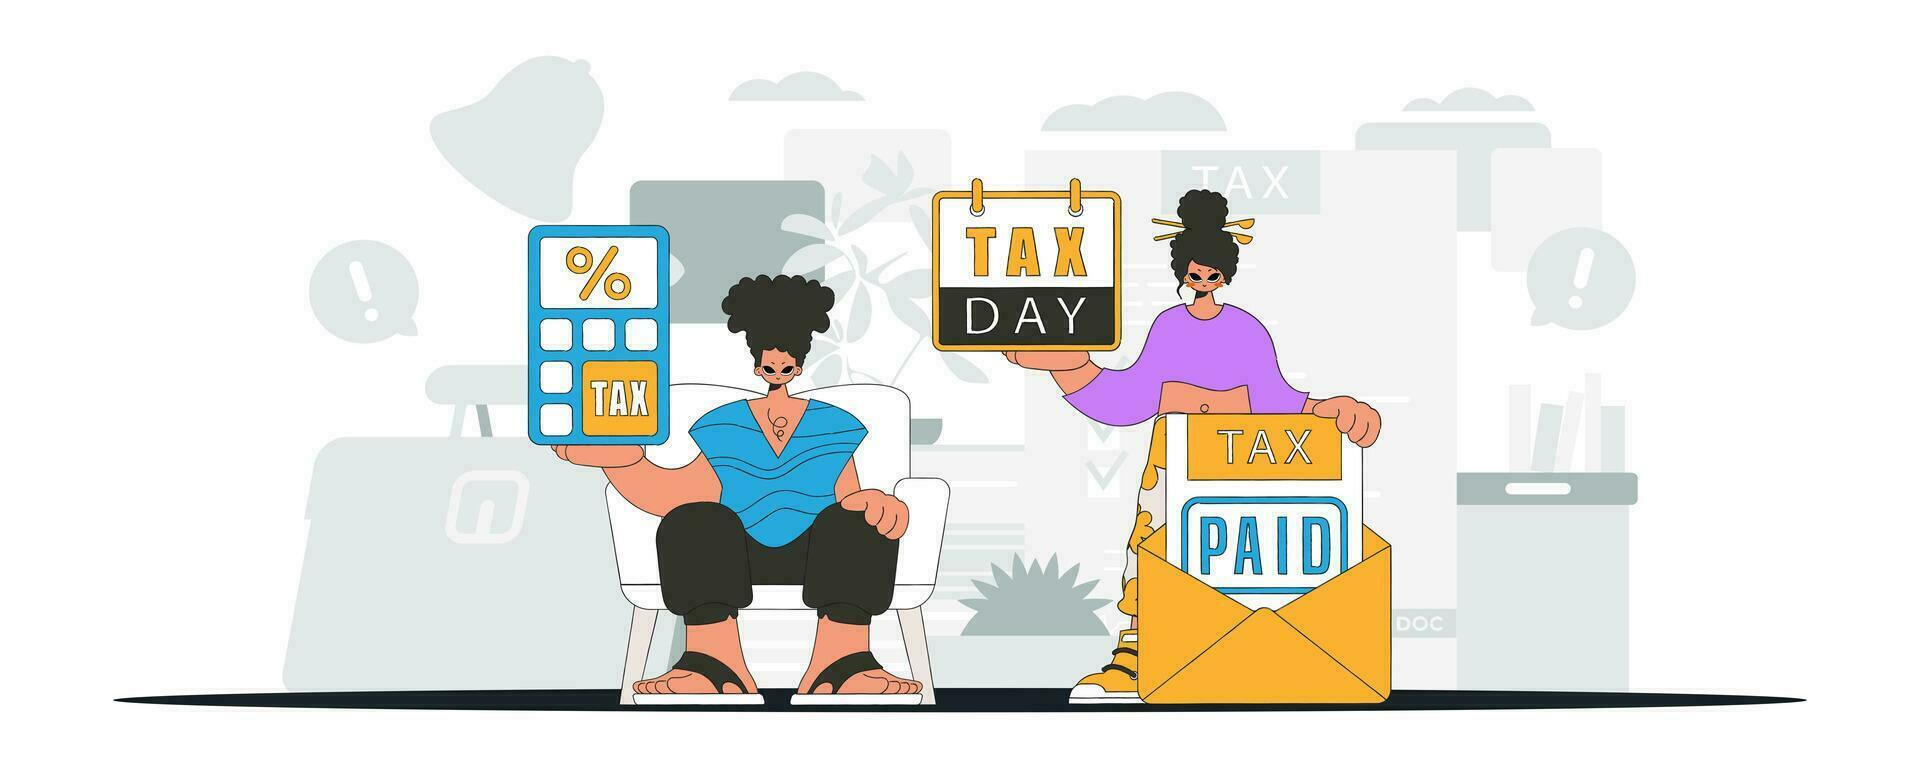 An elegant guy and a girl are engaged in paying taxes. An illustration demonstrating the importance of paying taxes for economic development. vector